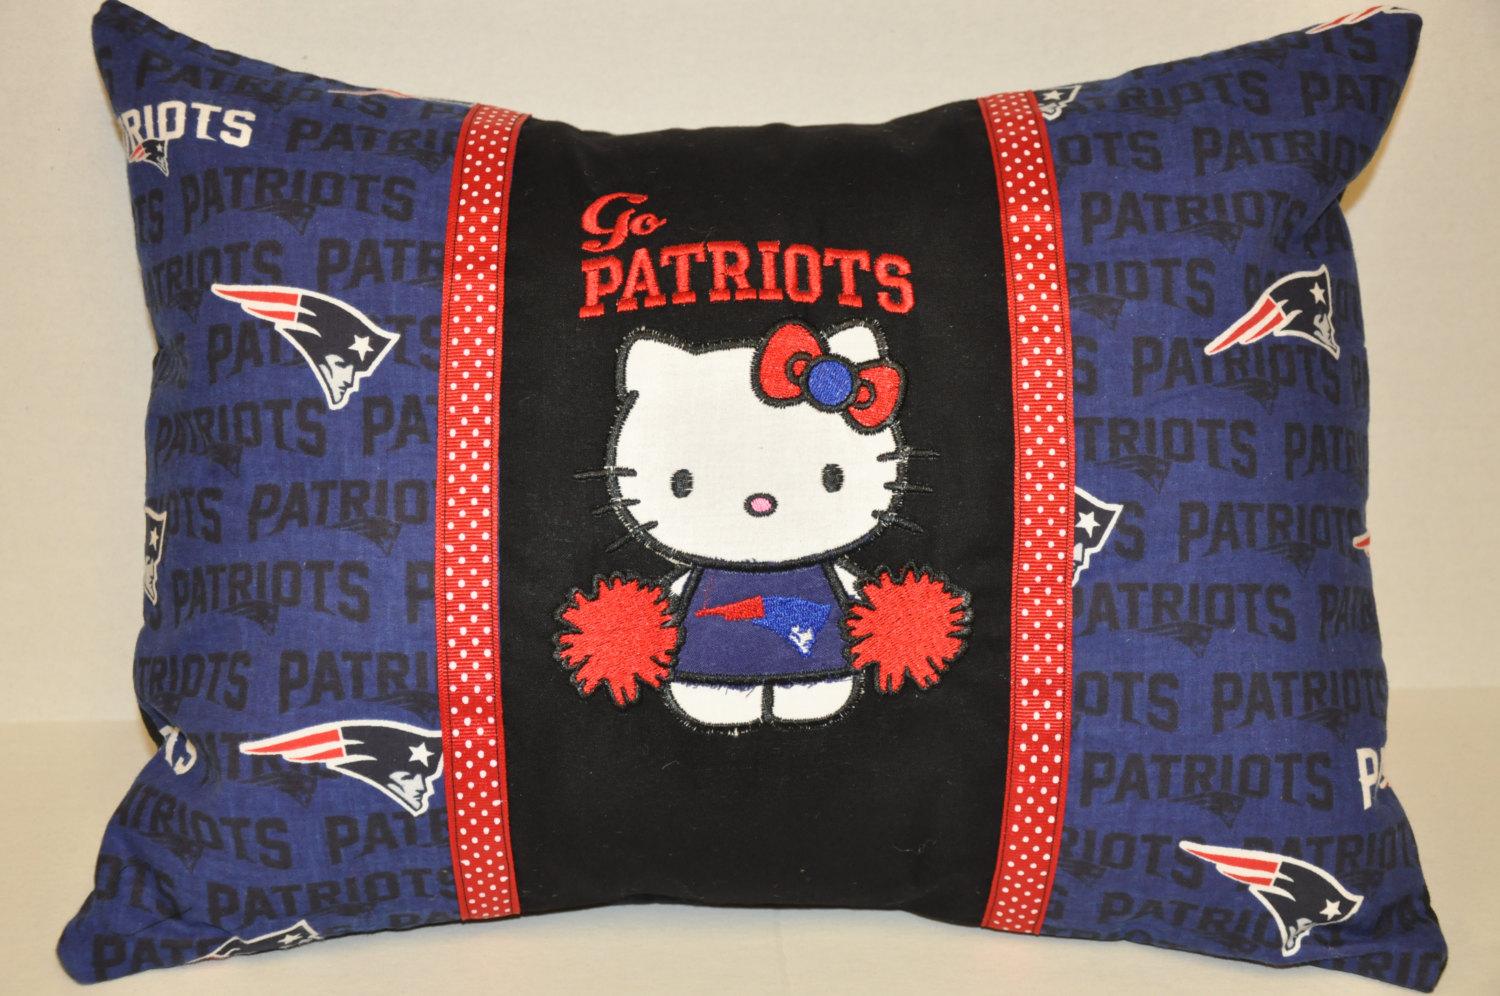 Hello Kitty New England Patriots embroidered at pillow